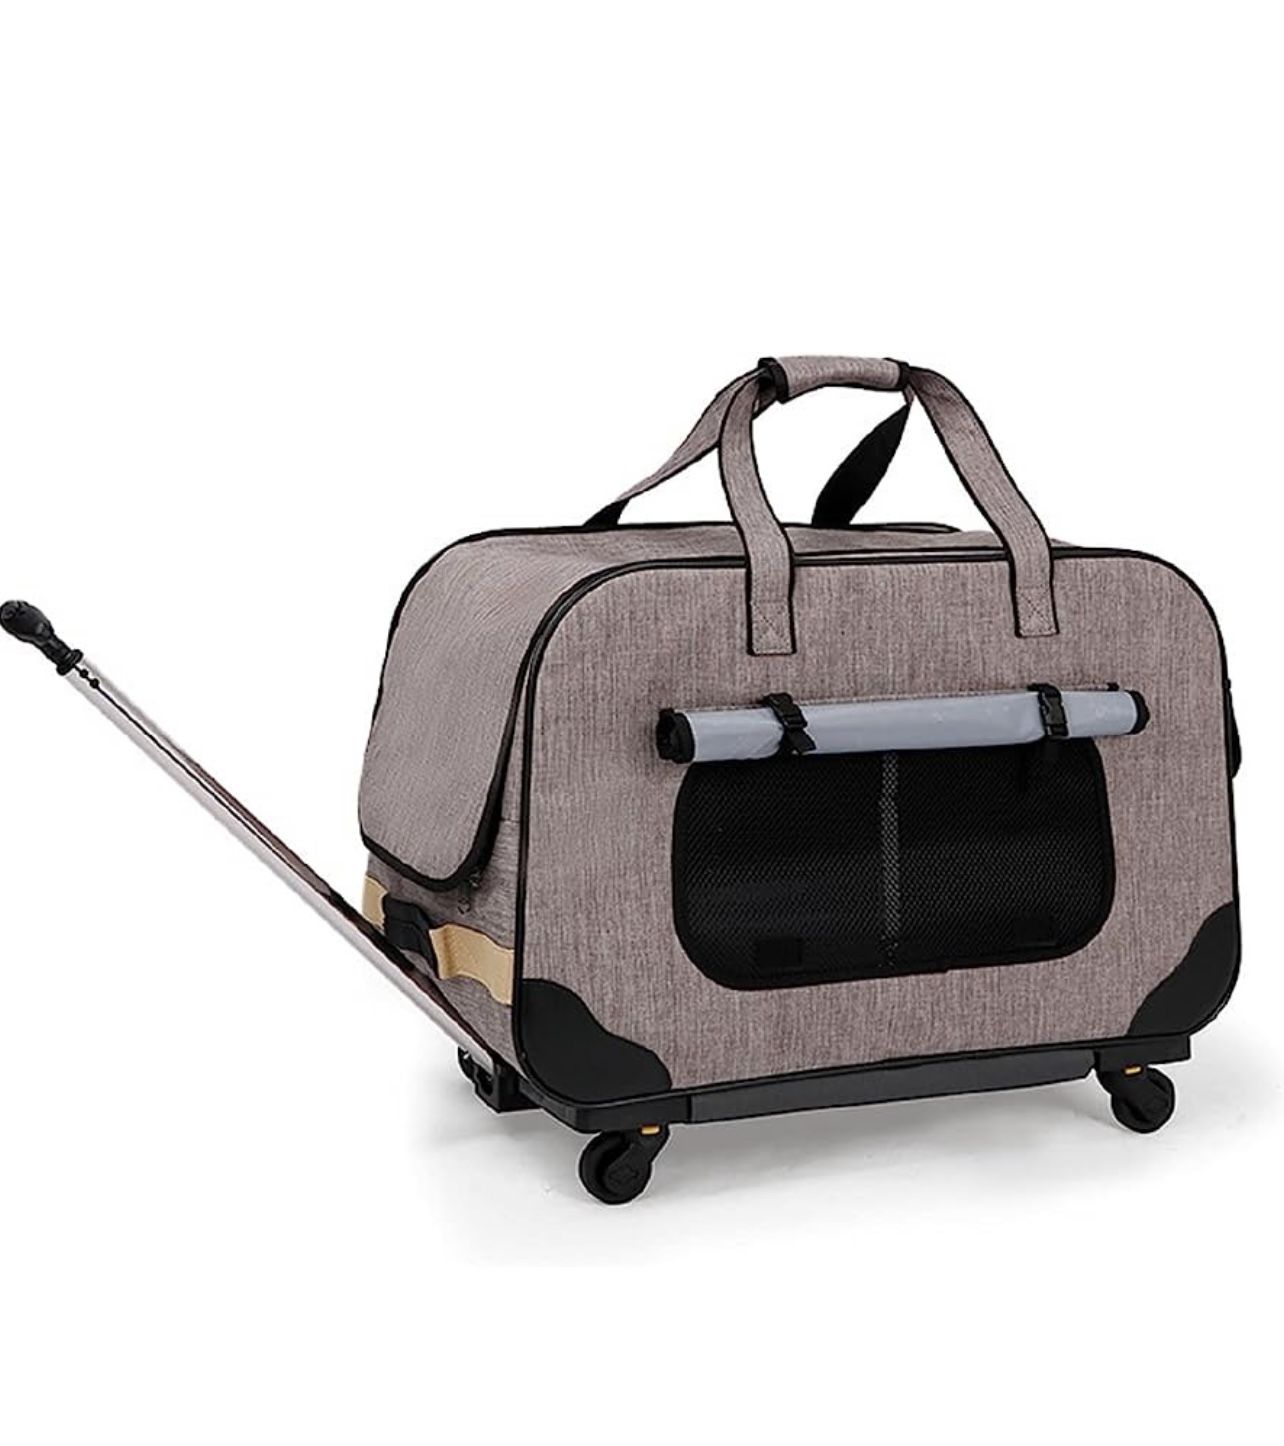 Was 130$ ELEGX Large Space for Up to (28 LBS-35 LBS) Pet Rolling Carrier with Detachable Wheels, Plenty of Room, Collapsible and Breathable, for Car S